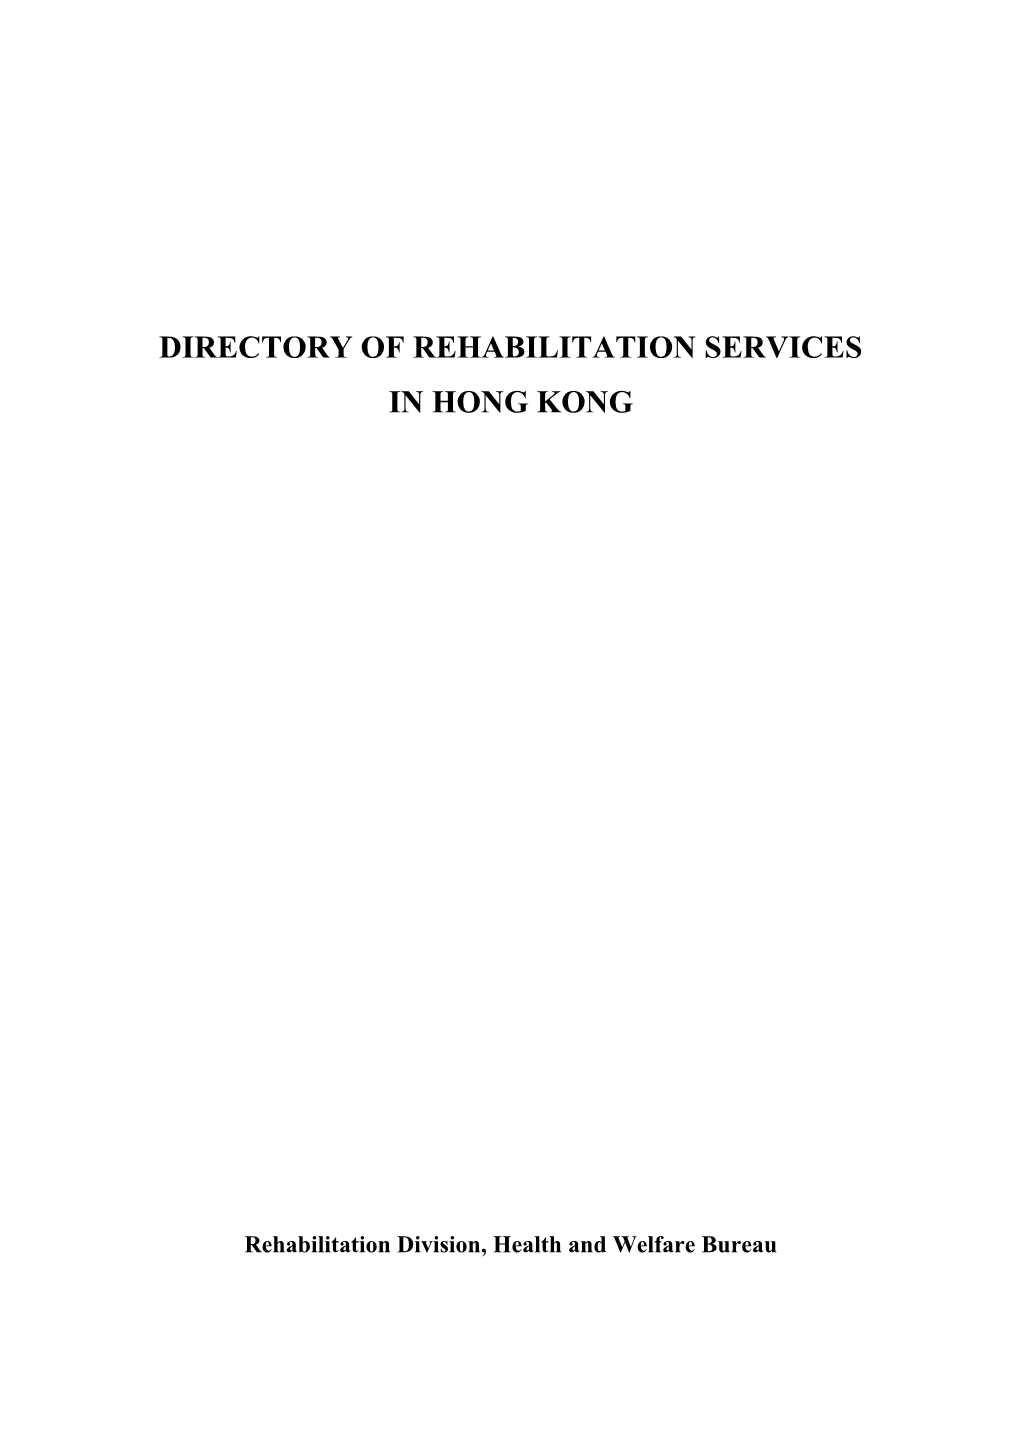 Directory Ofrehabilitation Services in Hong Kong